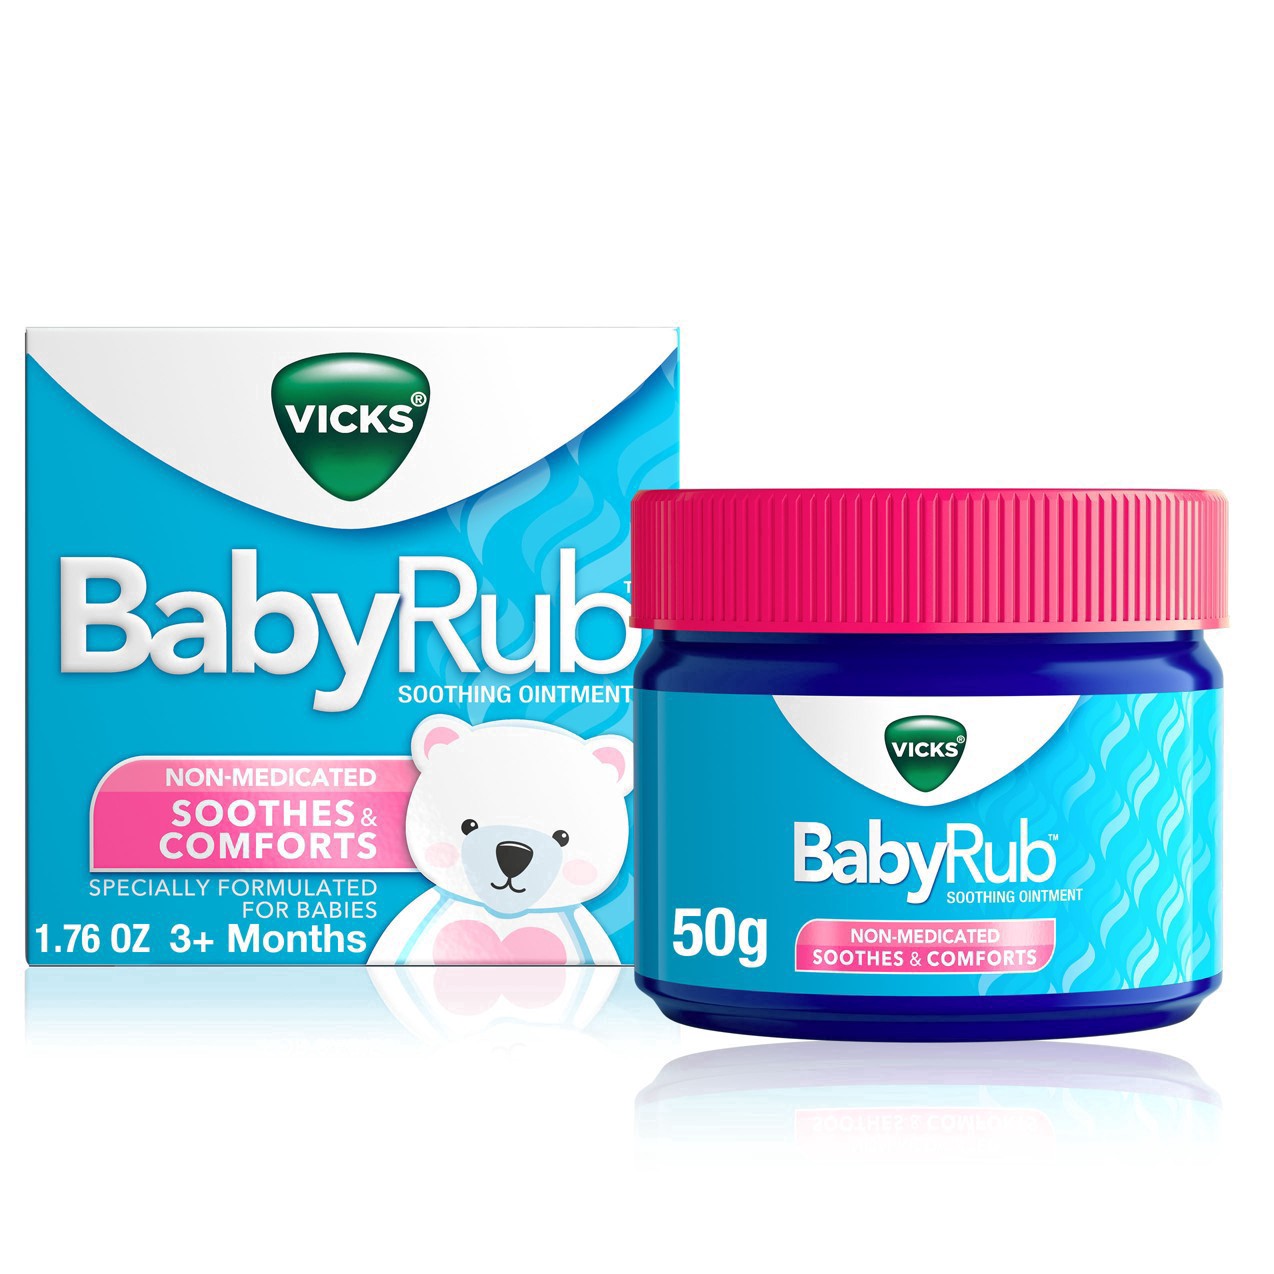 slide 46 of 78, Vicks BabyRub, Chest Rub Ointment with Soothing Aloe, Eucalyptus, Lavender, and Rosemary, from The Makers of VapoRub, 1.76 oz, 1.76 oz